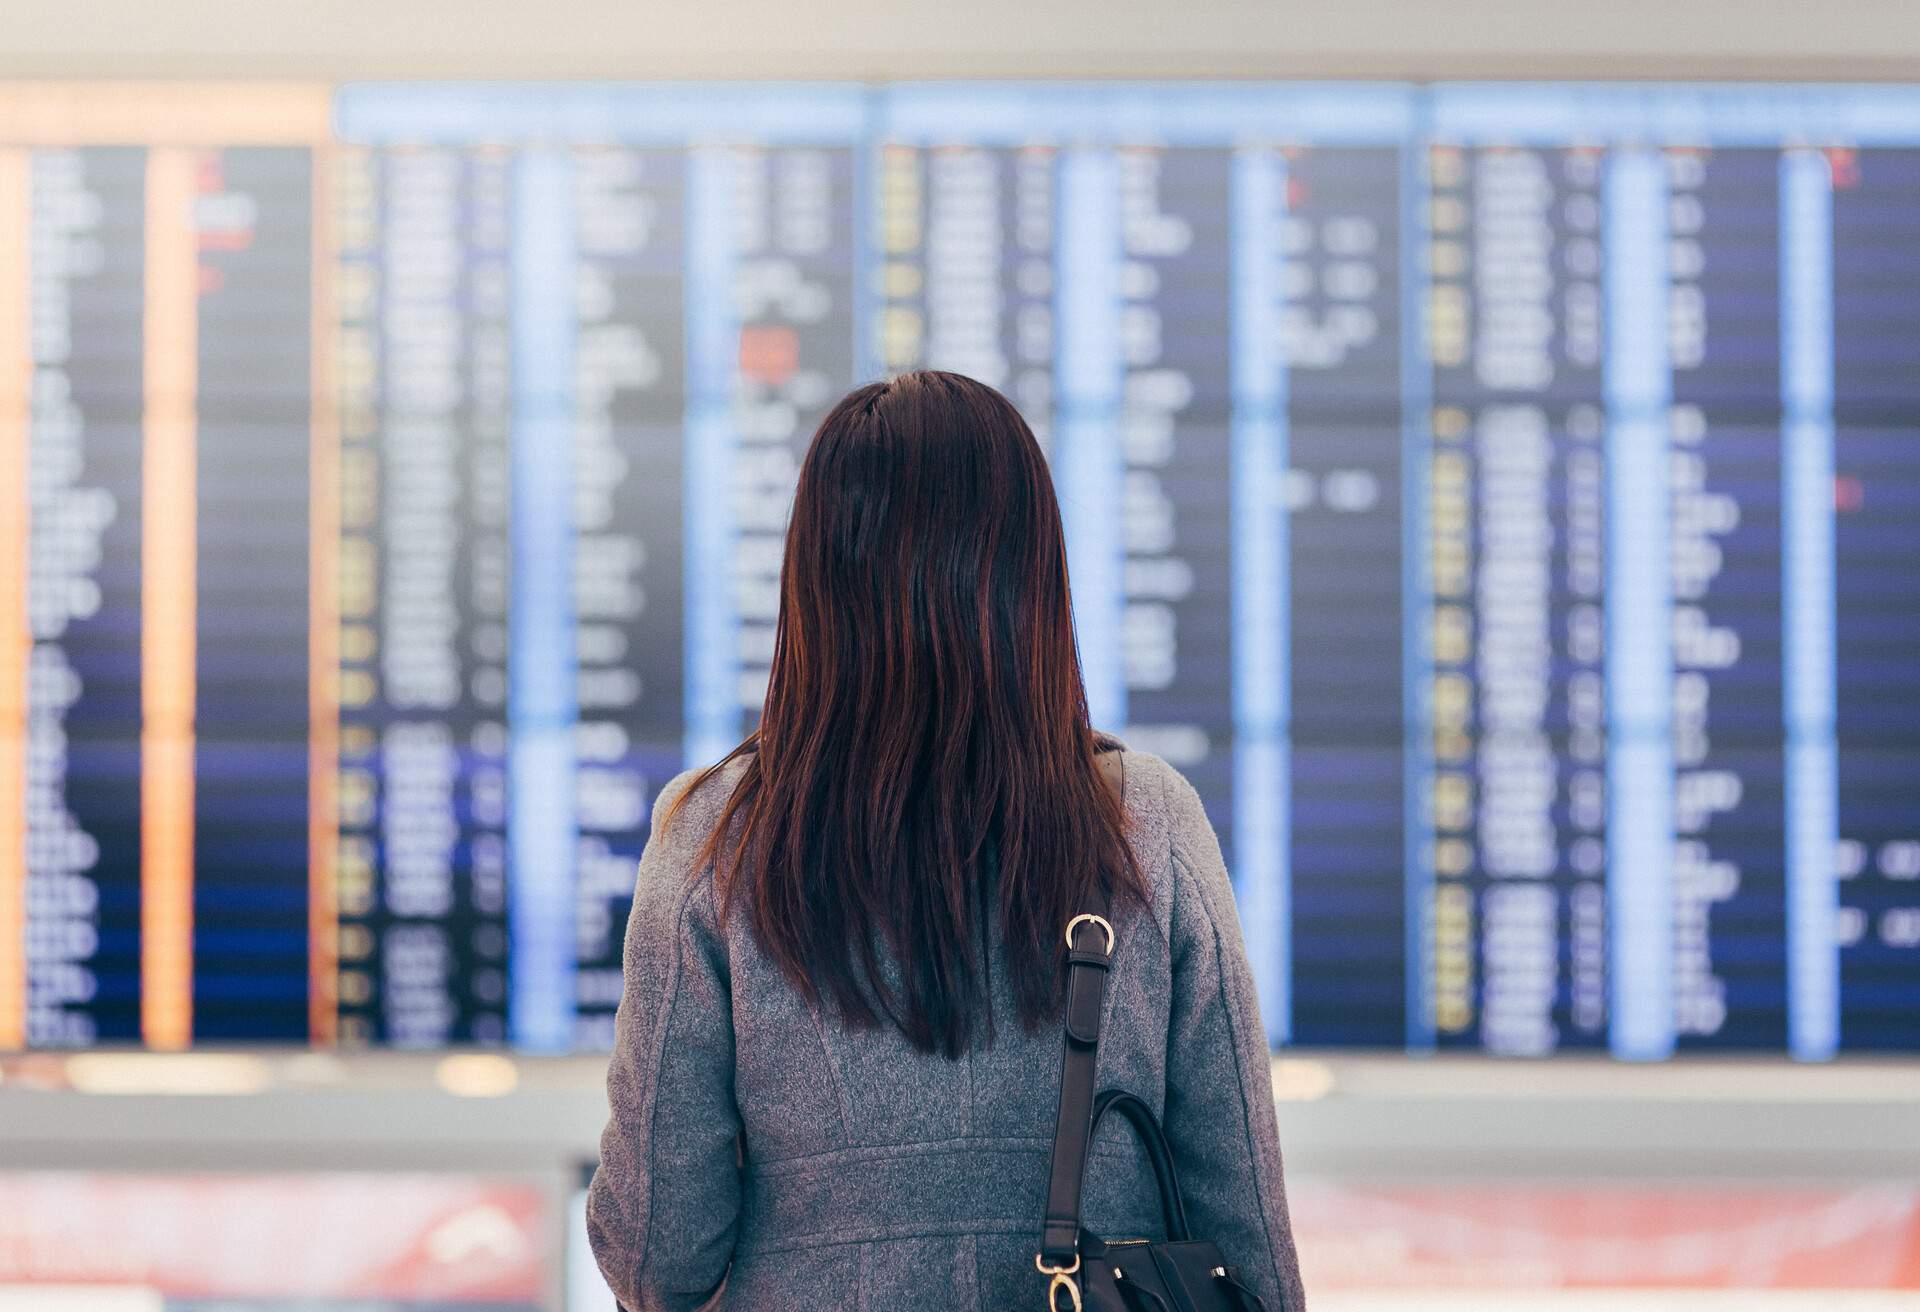 A woman at the airport looking at the arrival board